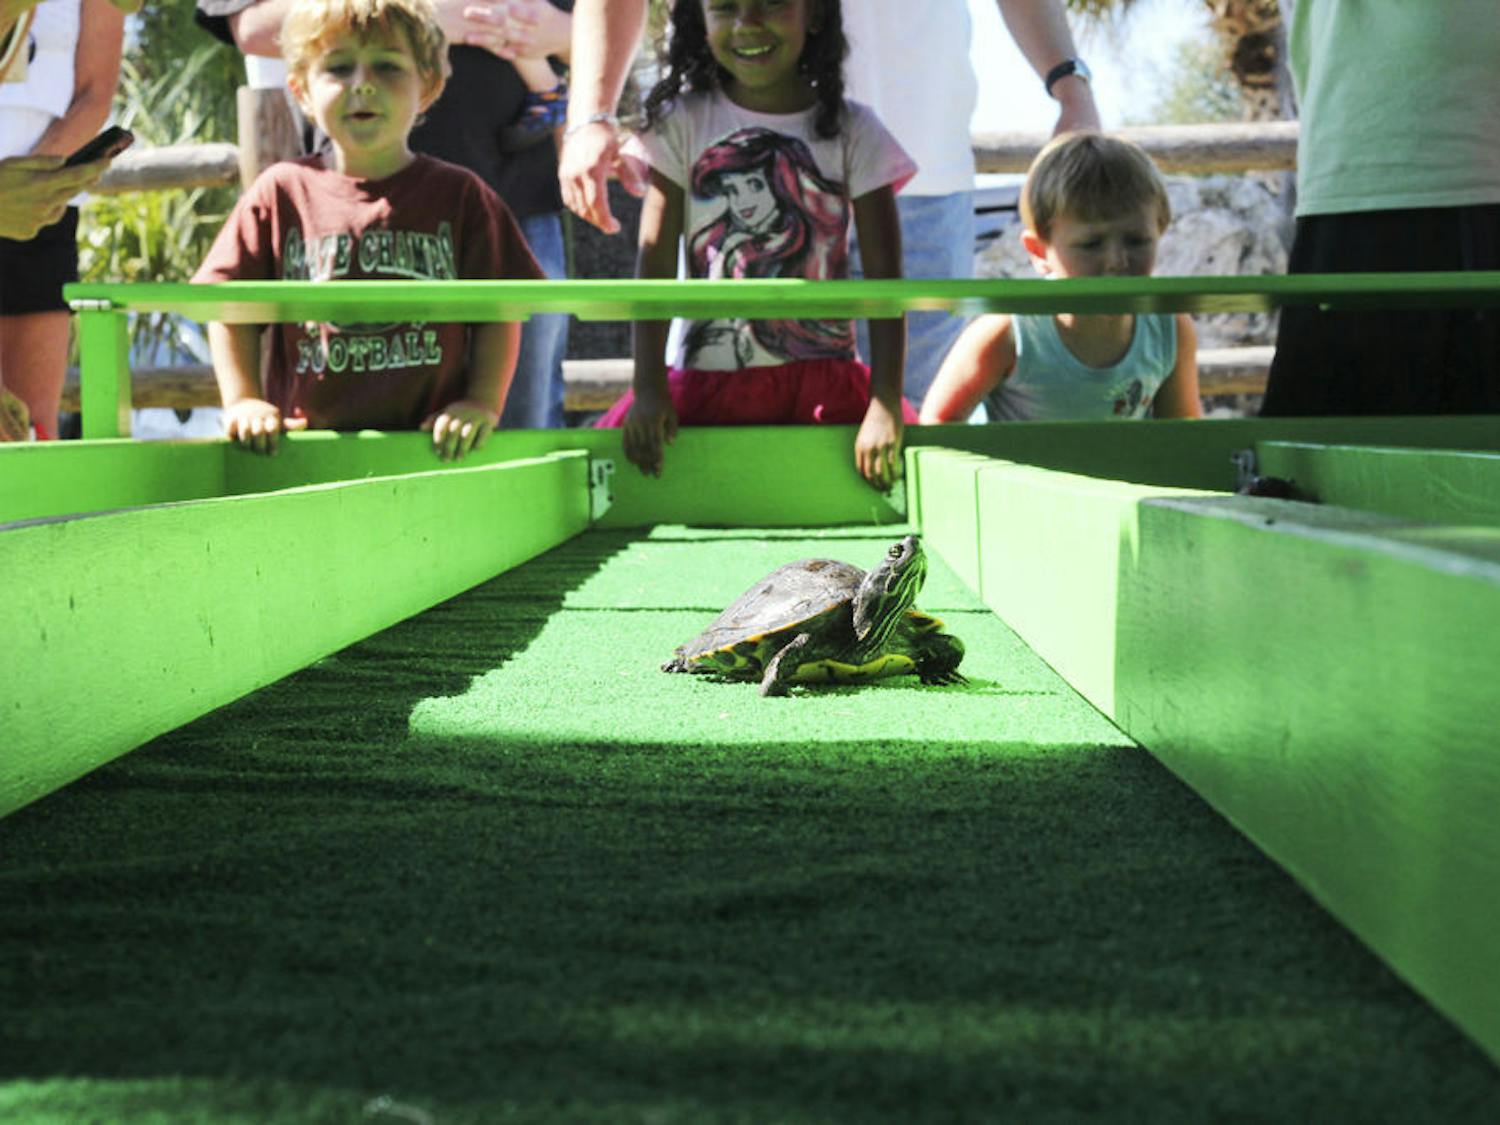 Children cheer on their turtles in a race during the 11th annual Cooter Festival on Saturday in Inverness, Florida. The festival celebrated the indigenous Cooter turtle and featured more than 80 vendors.